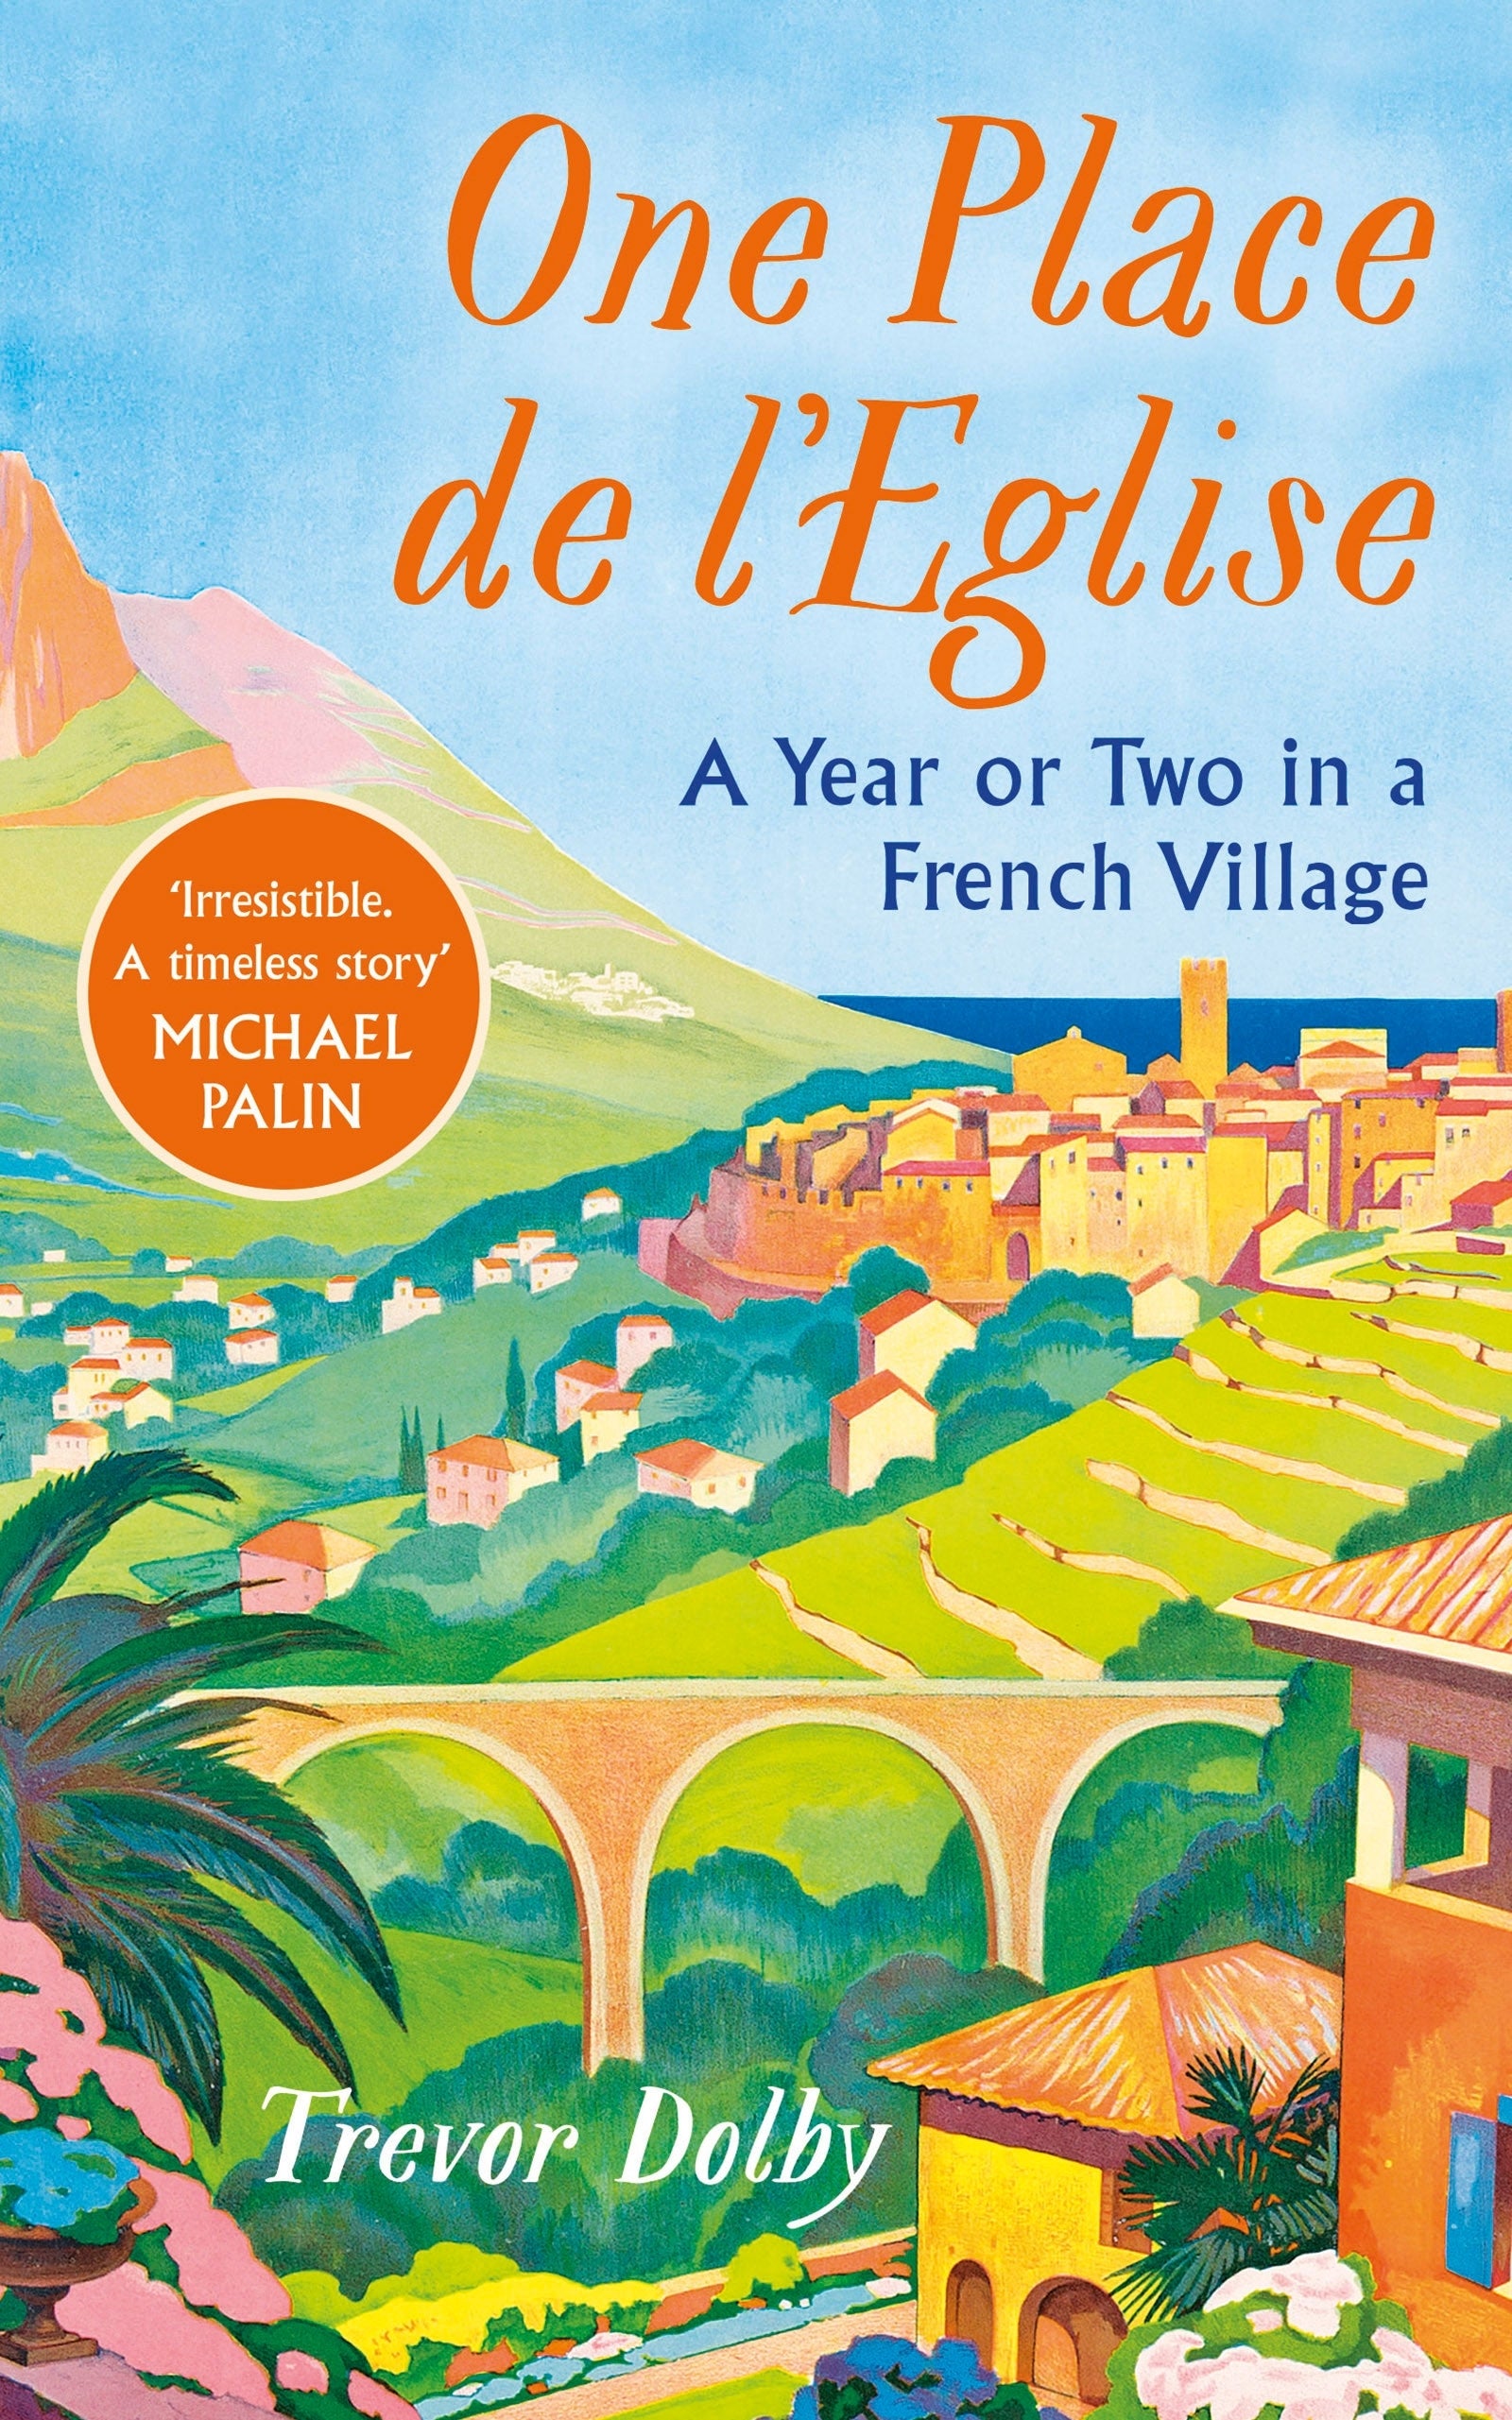 One Place de I'Eglise: A Year in Provence for the 21st century